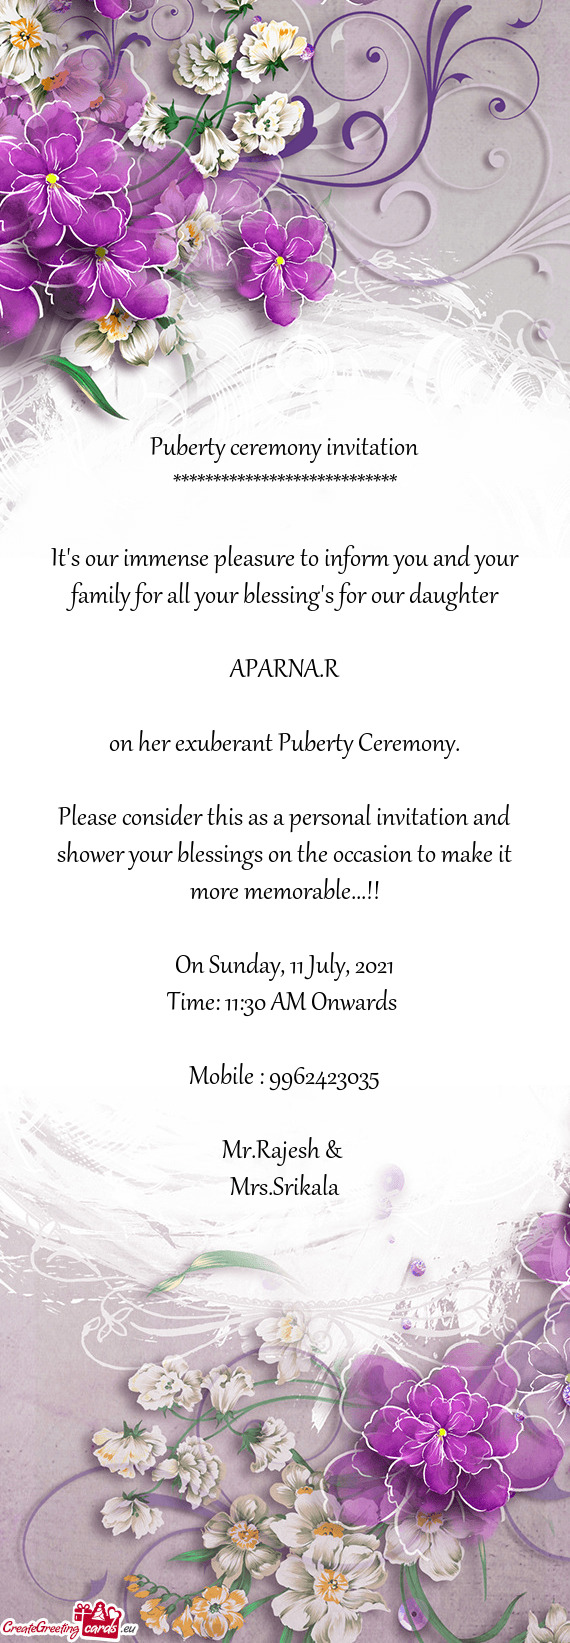 Please consider this as a personal invitation and shower your blessings on the occasion to make it m